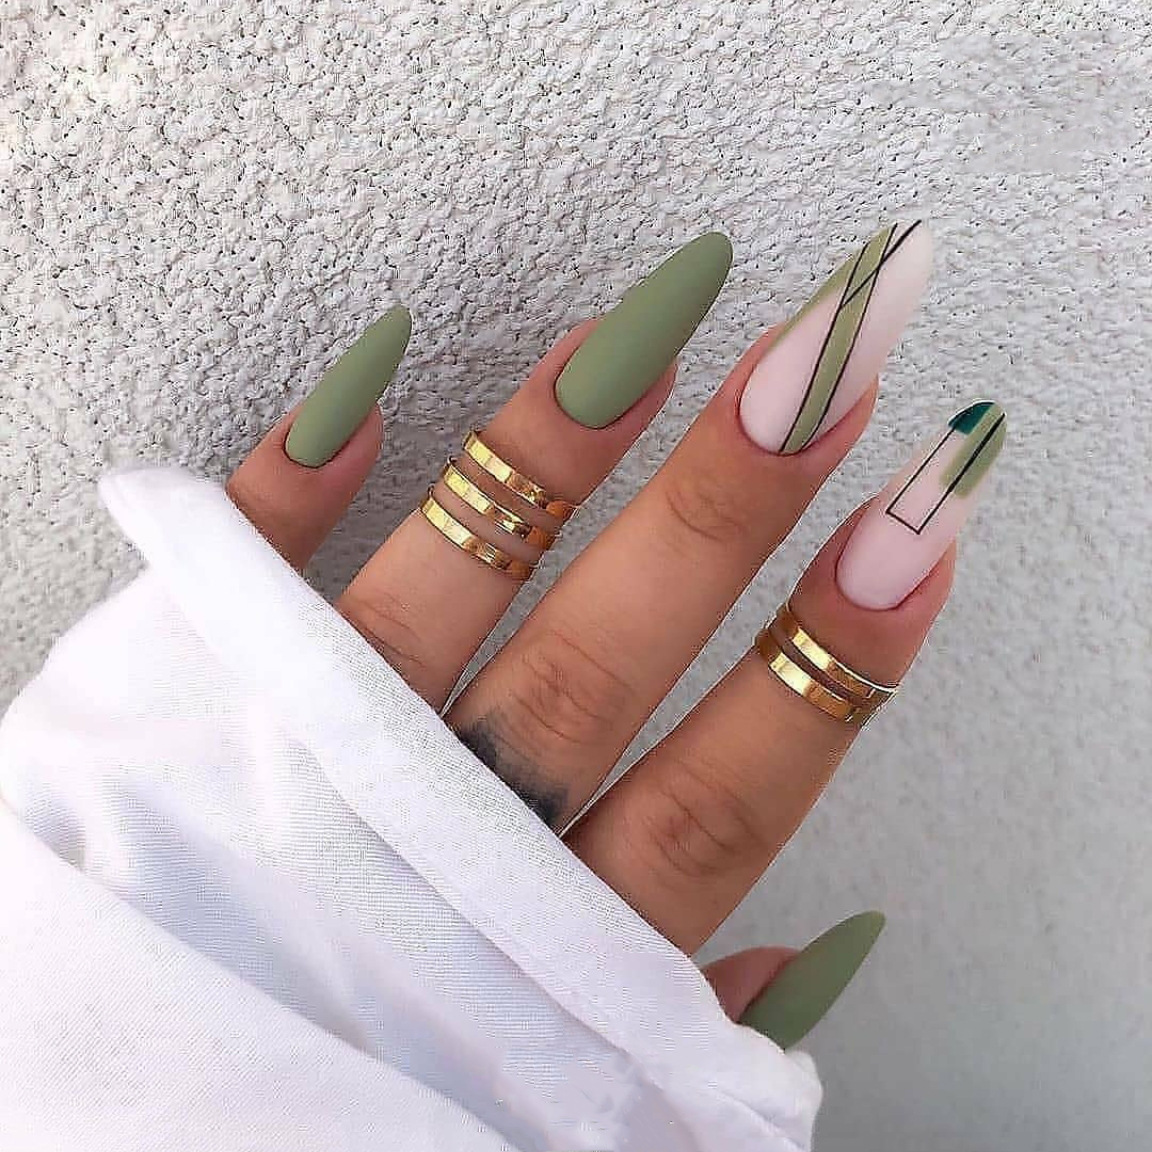 24pcs false nails matte Green Nails Patch with glue Removable Long Paragraph Fashion Manicure press on Nail tips free shipping